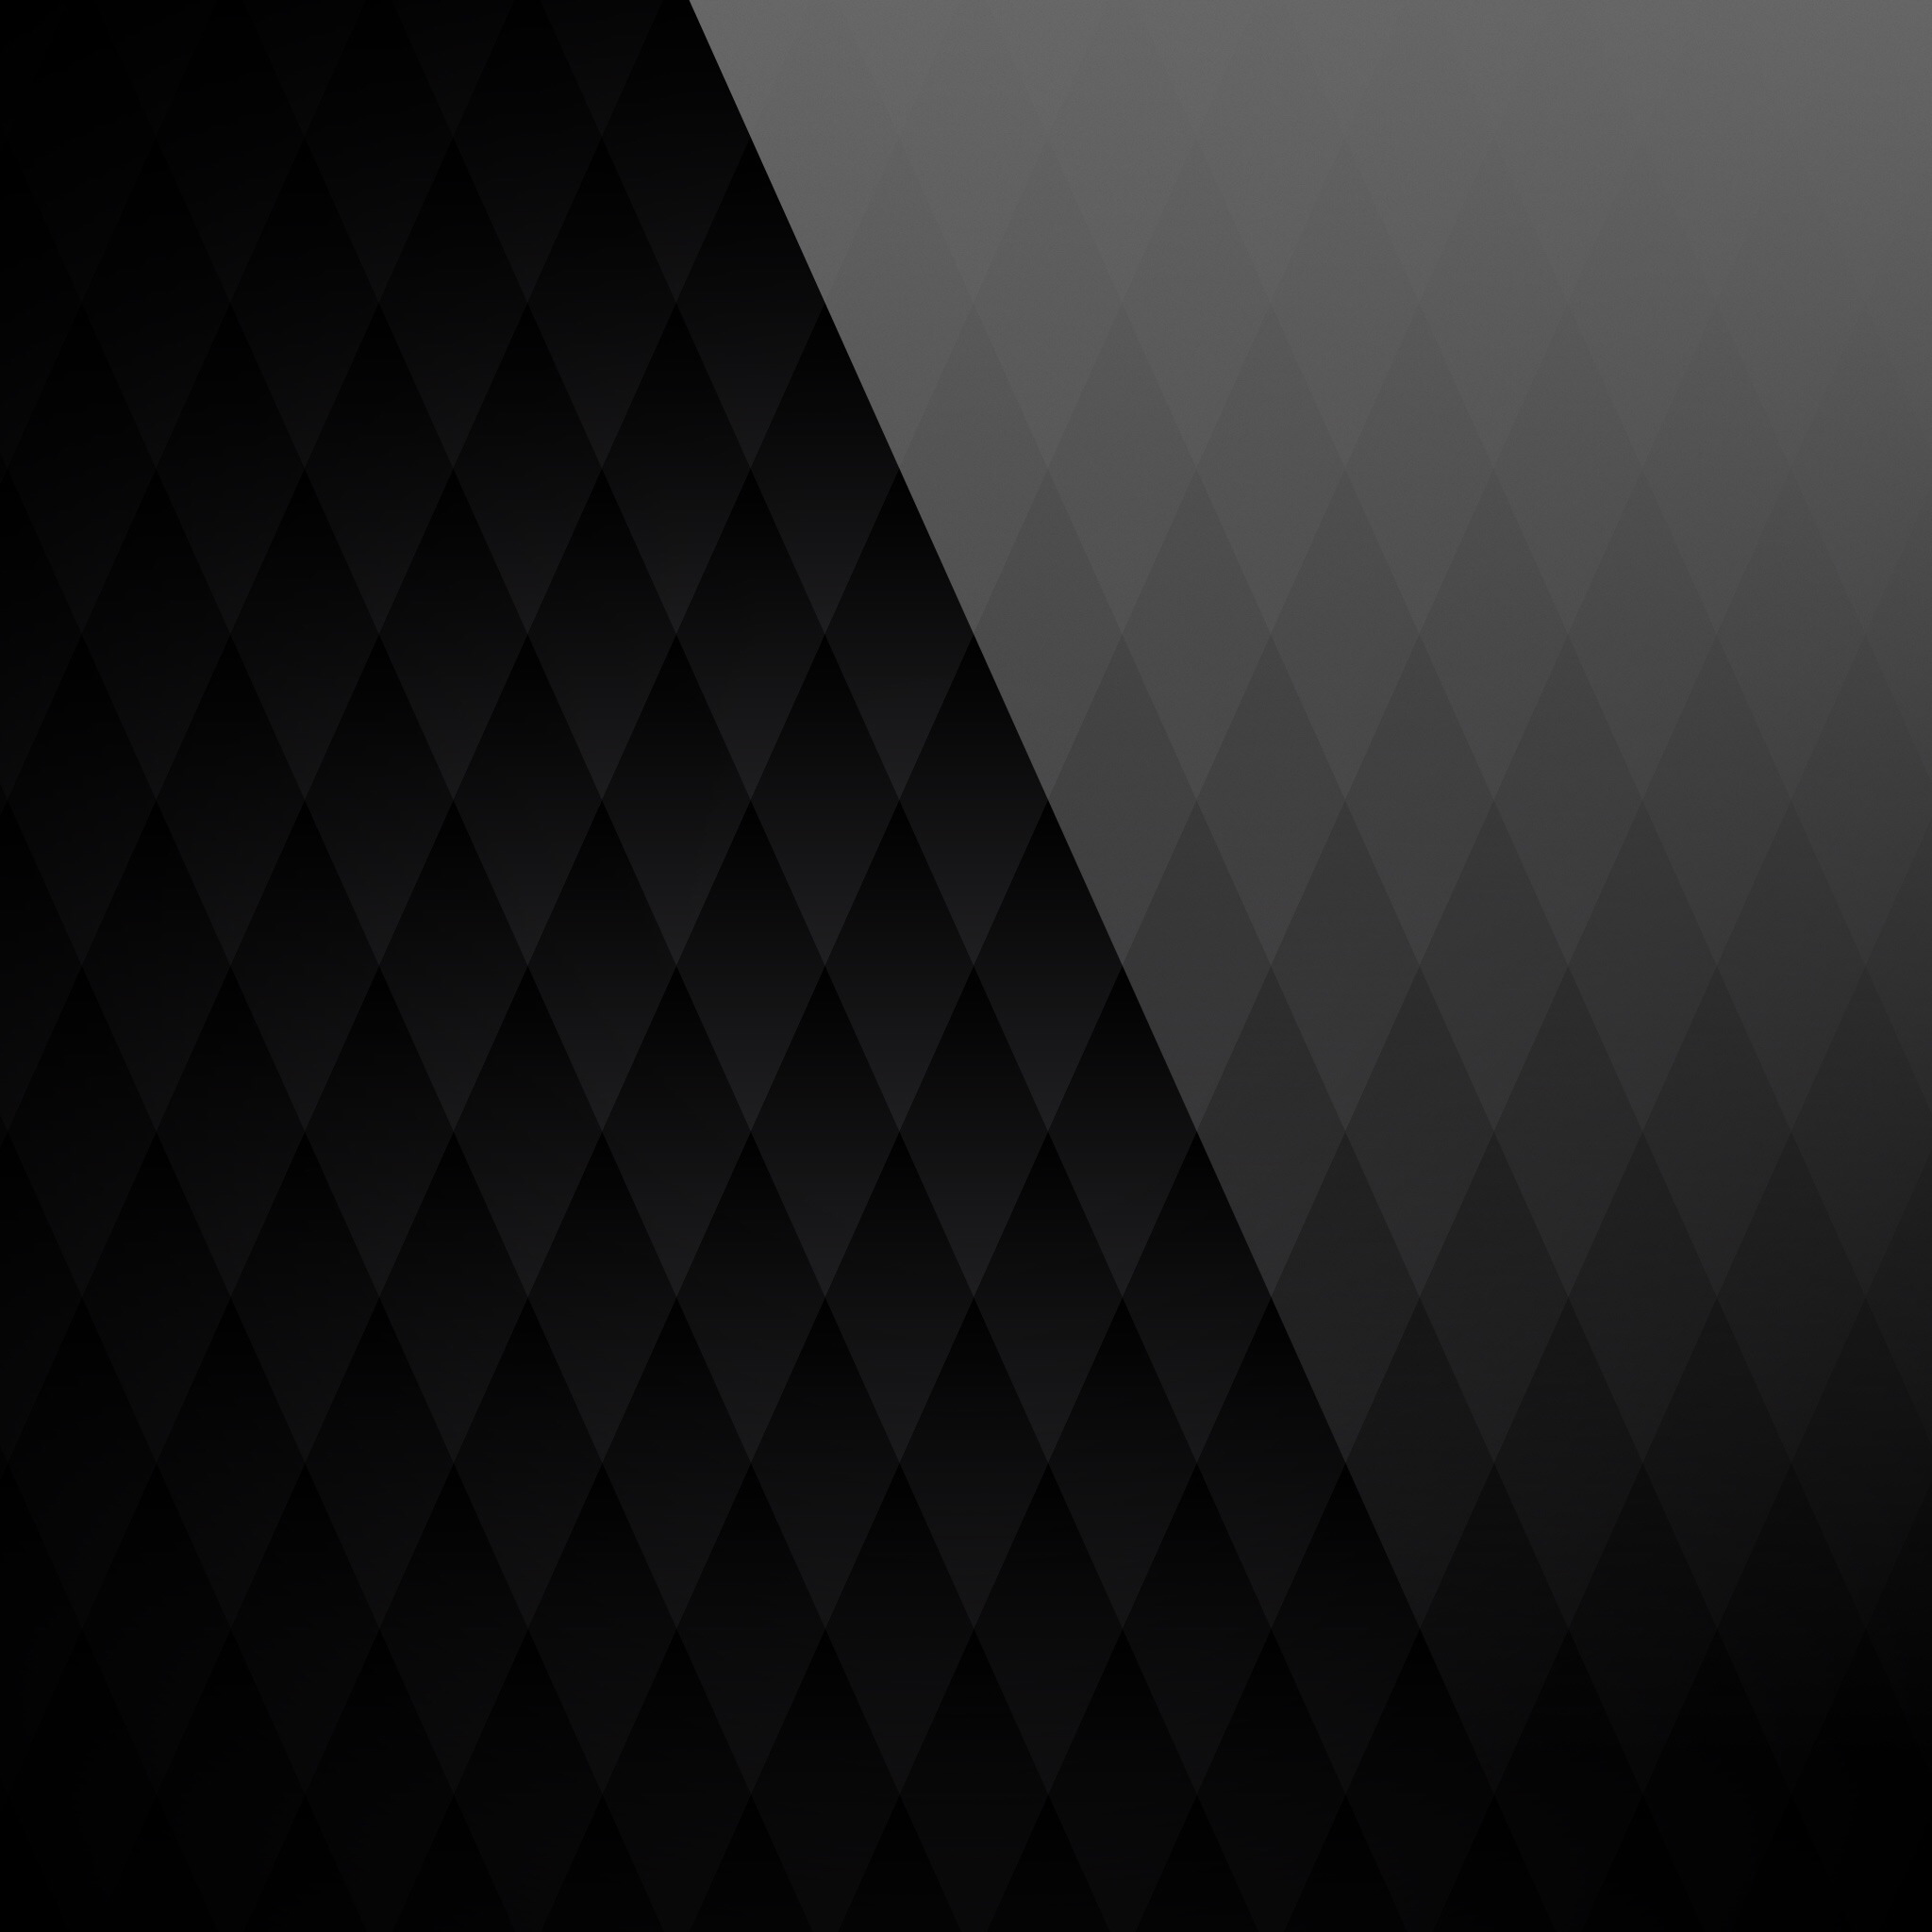 1080x1920 / 1080x1920 abstract, texture, hd, black for Iphone 6, 7, 8  wallpaper - Coolwallpapers.me!